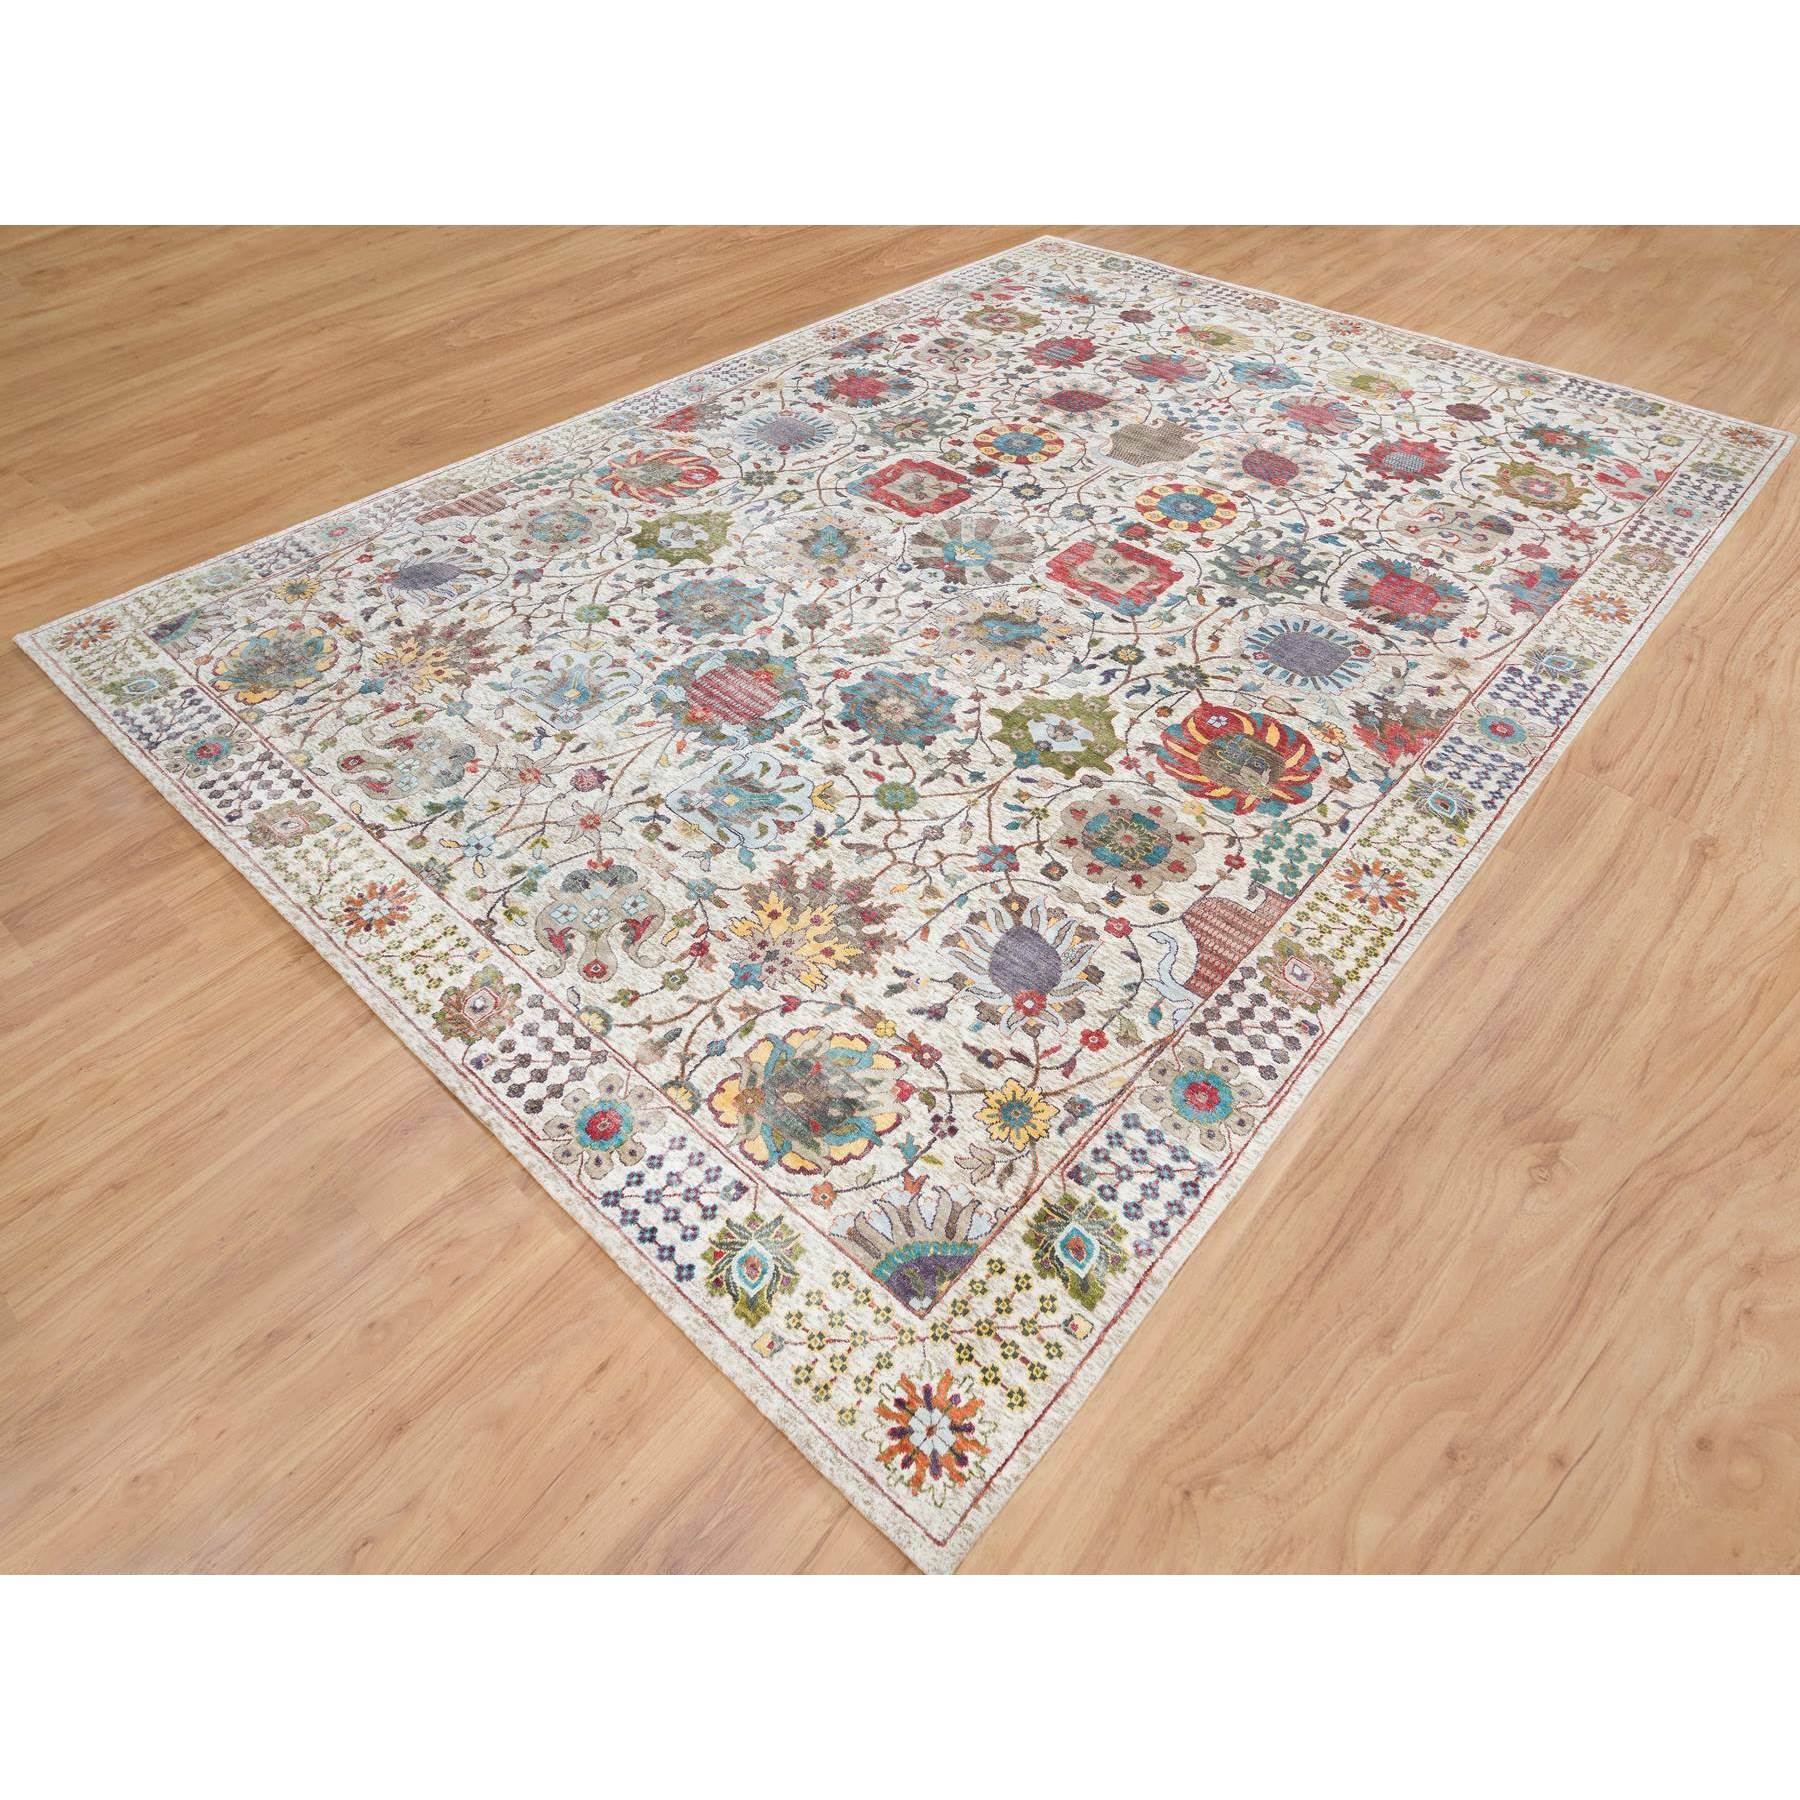  Silk Hand-Knotted Area Rug 10'2